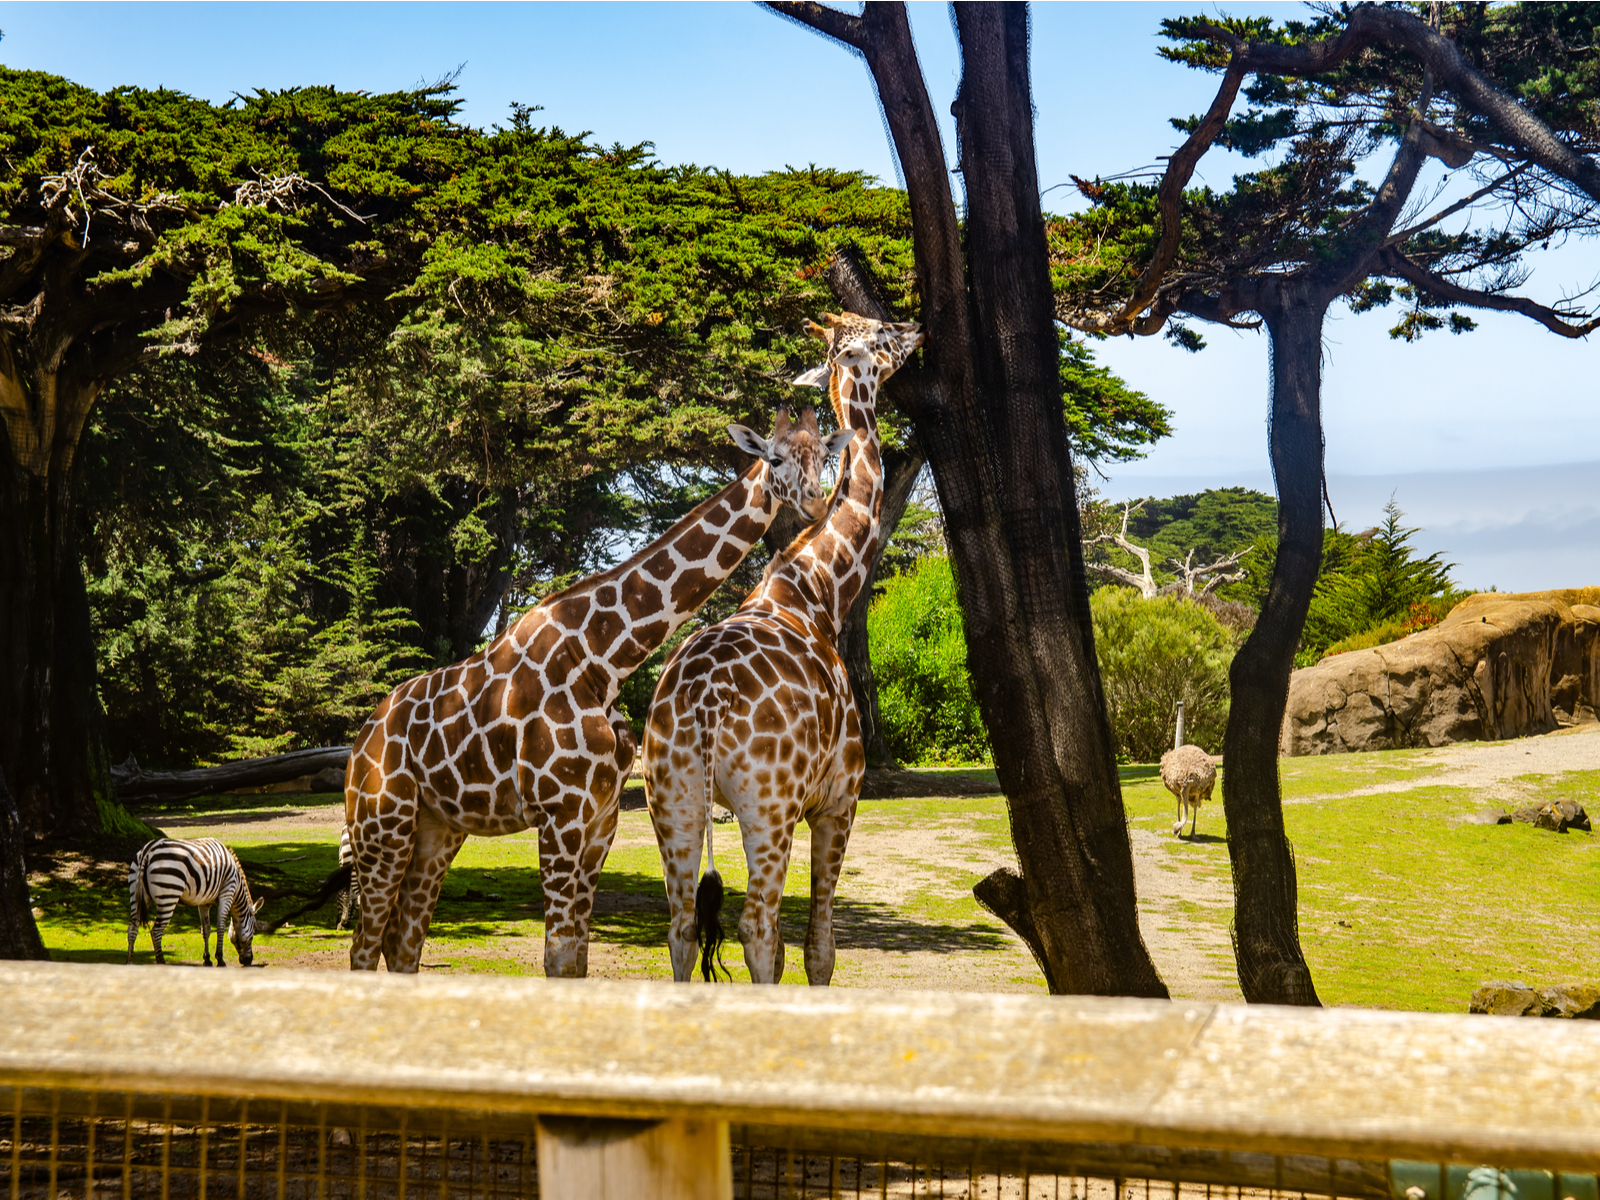 Giraffes at the San Francisco Zoo, one of the best attractions in San Francisco